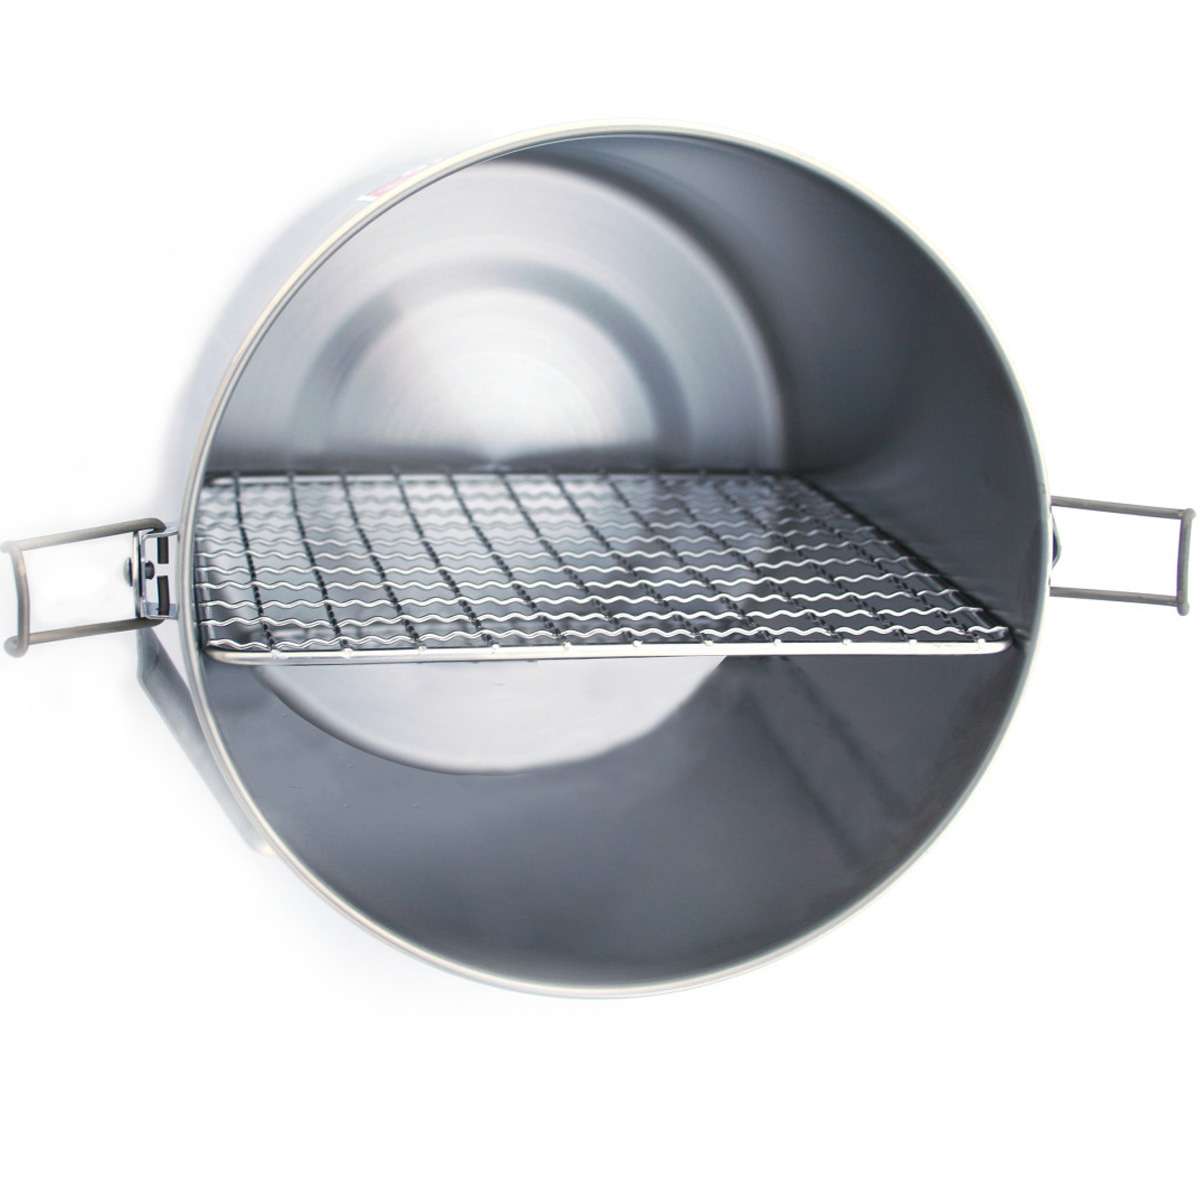 Firebox Stove Stainless Steel Baking Rack - Large 15cm Square